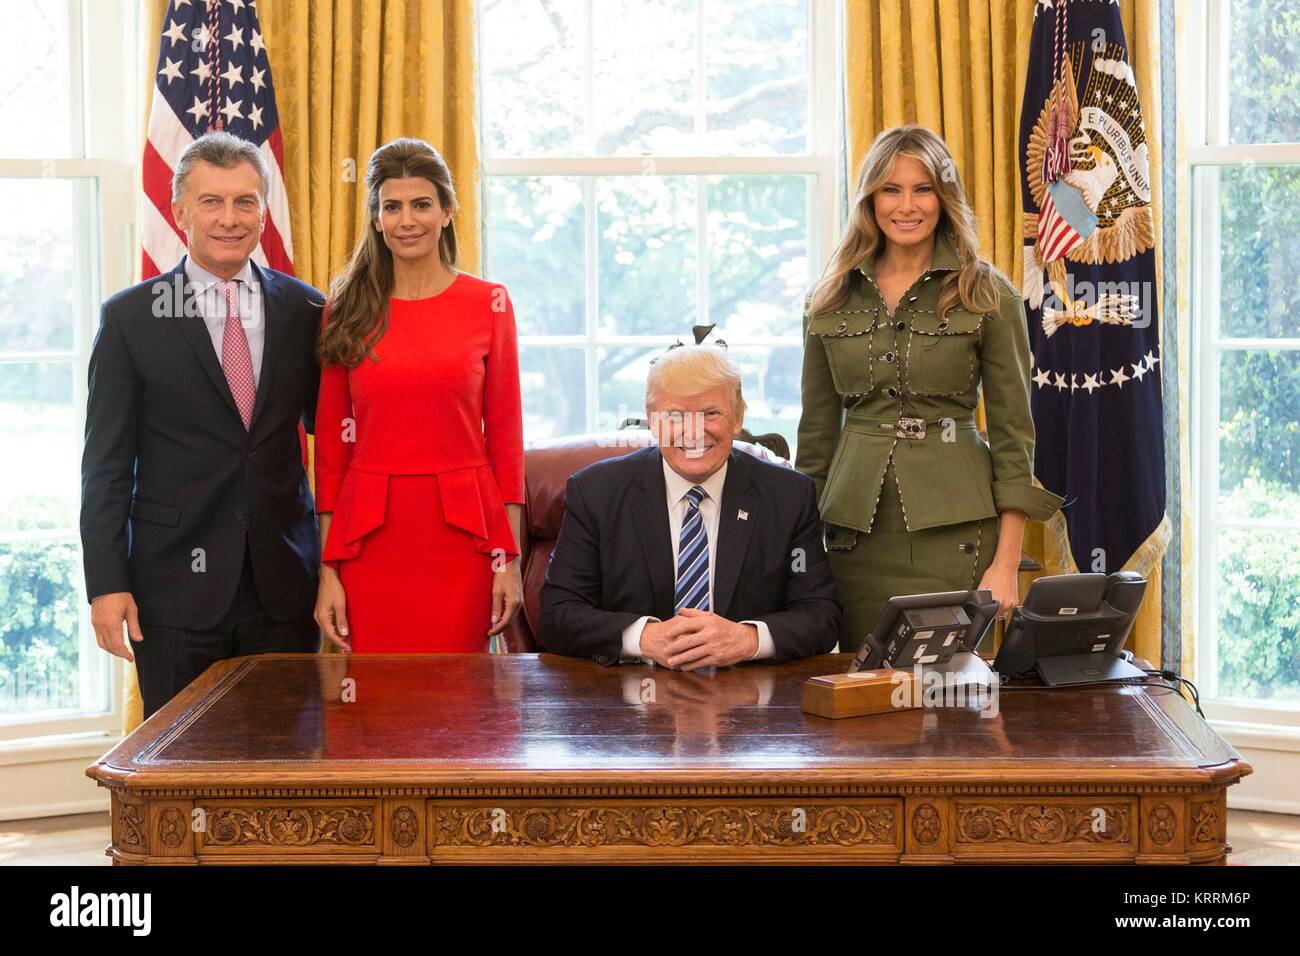 Argentinian President Mauricio Macri (left) and wife Juliana Awada pose with U.S. President Donald Trump and First Lady Melania Trump at the White House Oval Office April 27 2017 in Washington, DC. Stock Photo